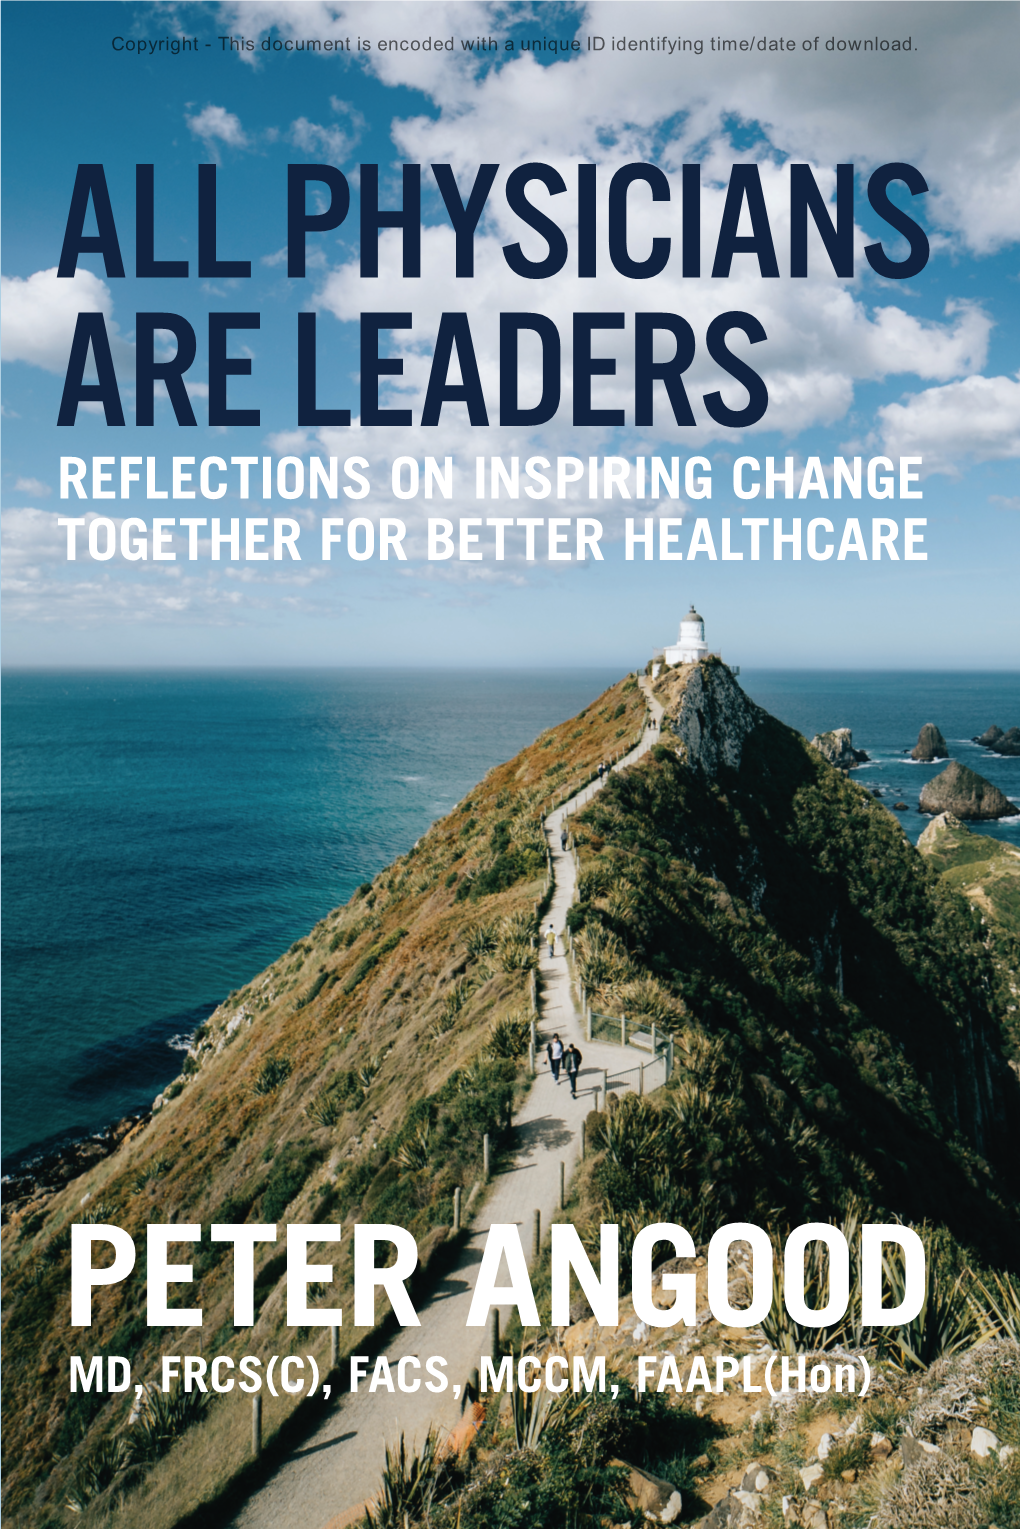 Physicians Are Leaders Reflections on Inspiring Change Together for Better Healthcare